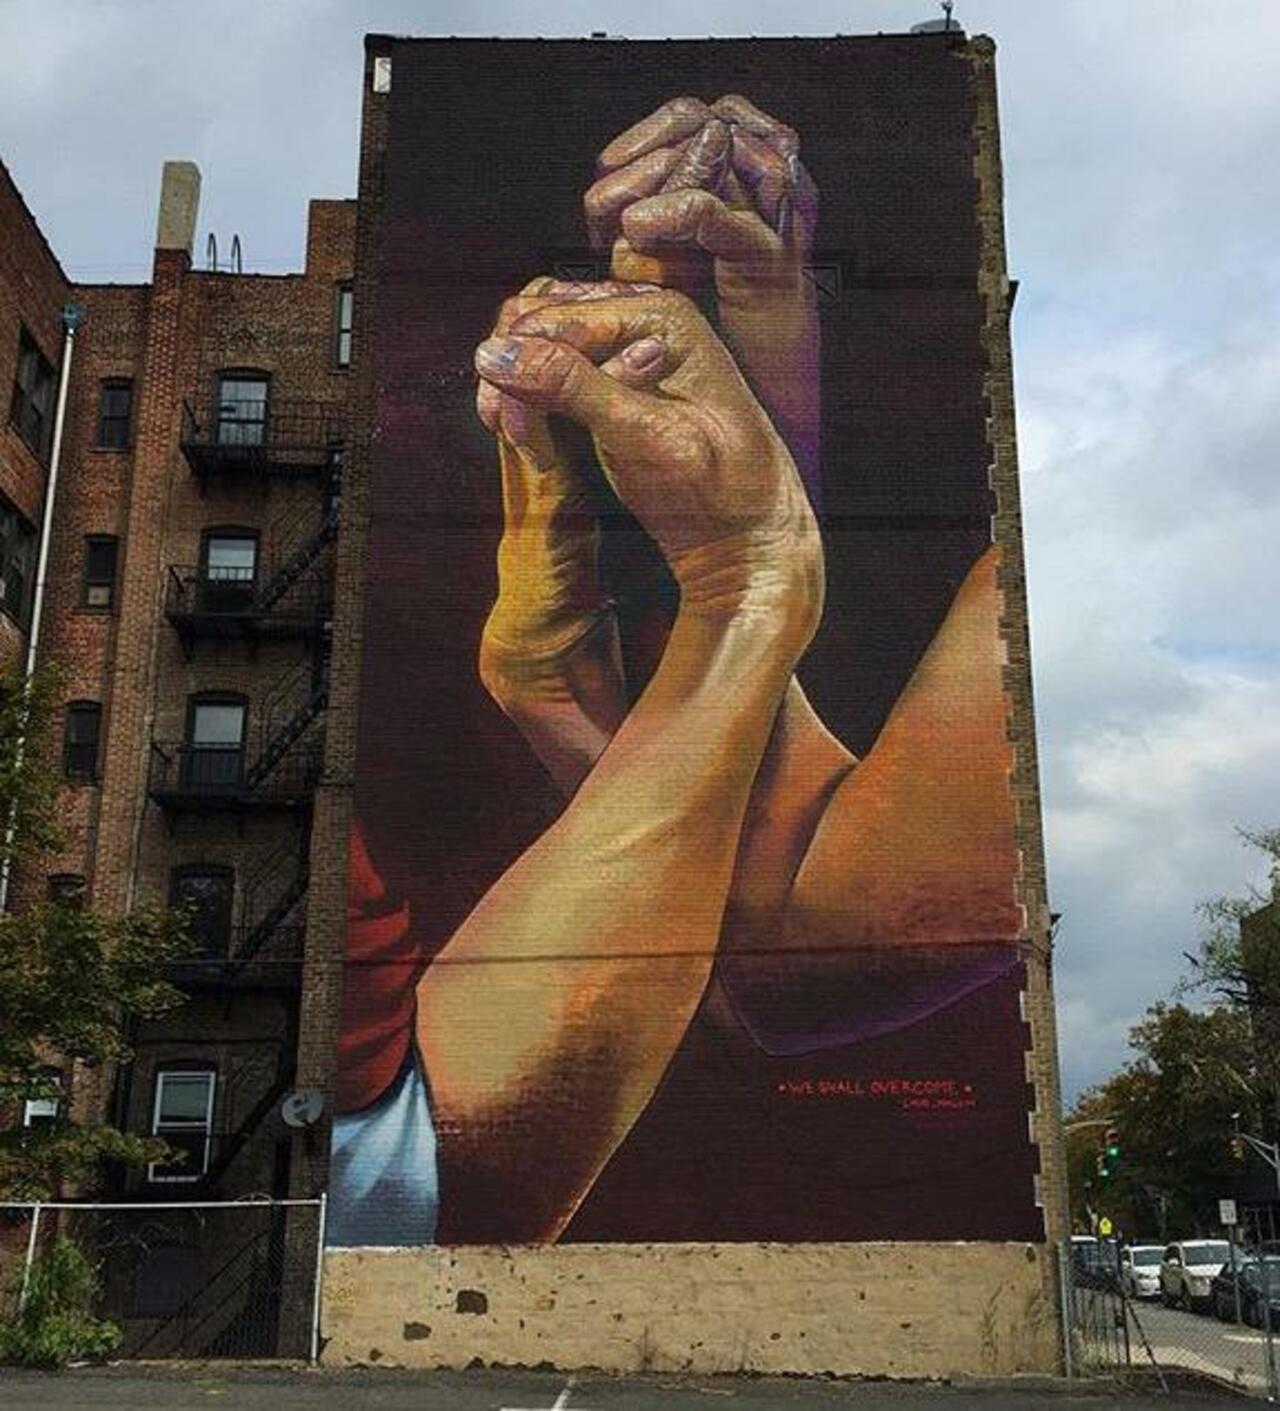 New Street Art by CaseMaclaim in Jersey City for the TheBKcollective 

#art #graffiti #mural #streetart http://t.co/YeW5aktT7A